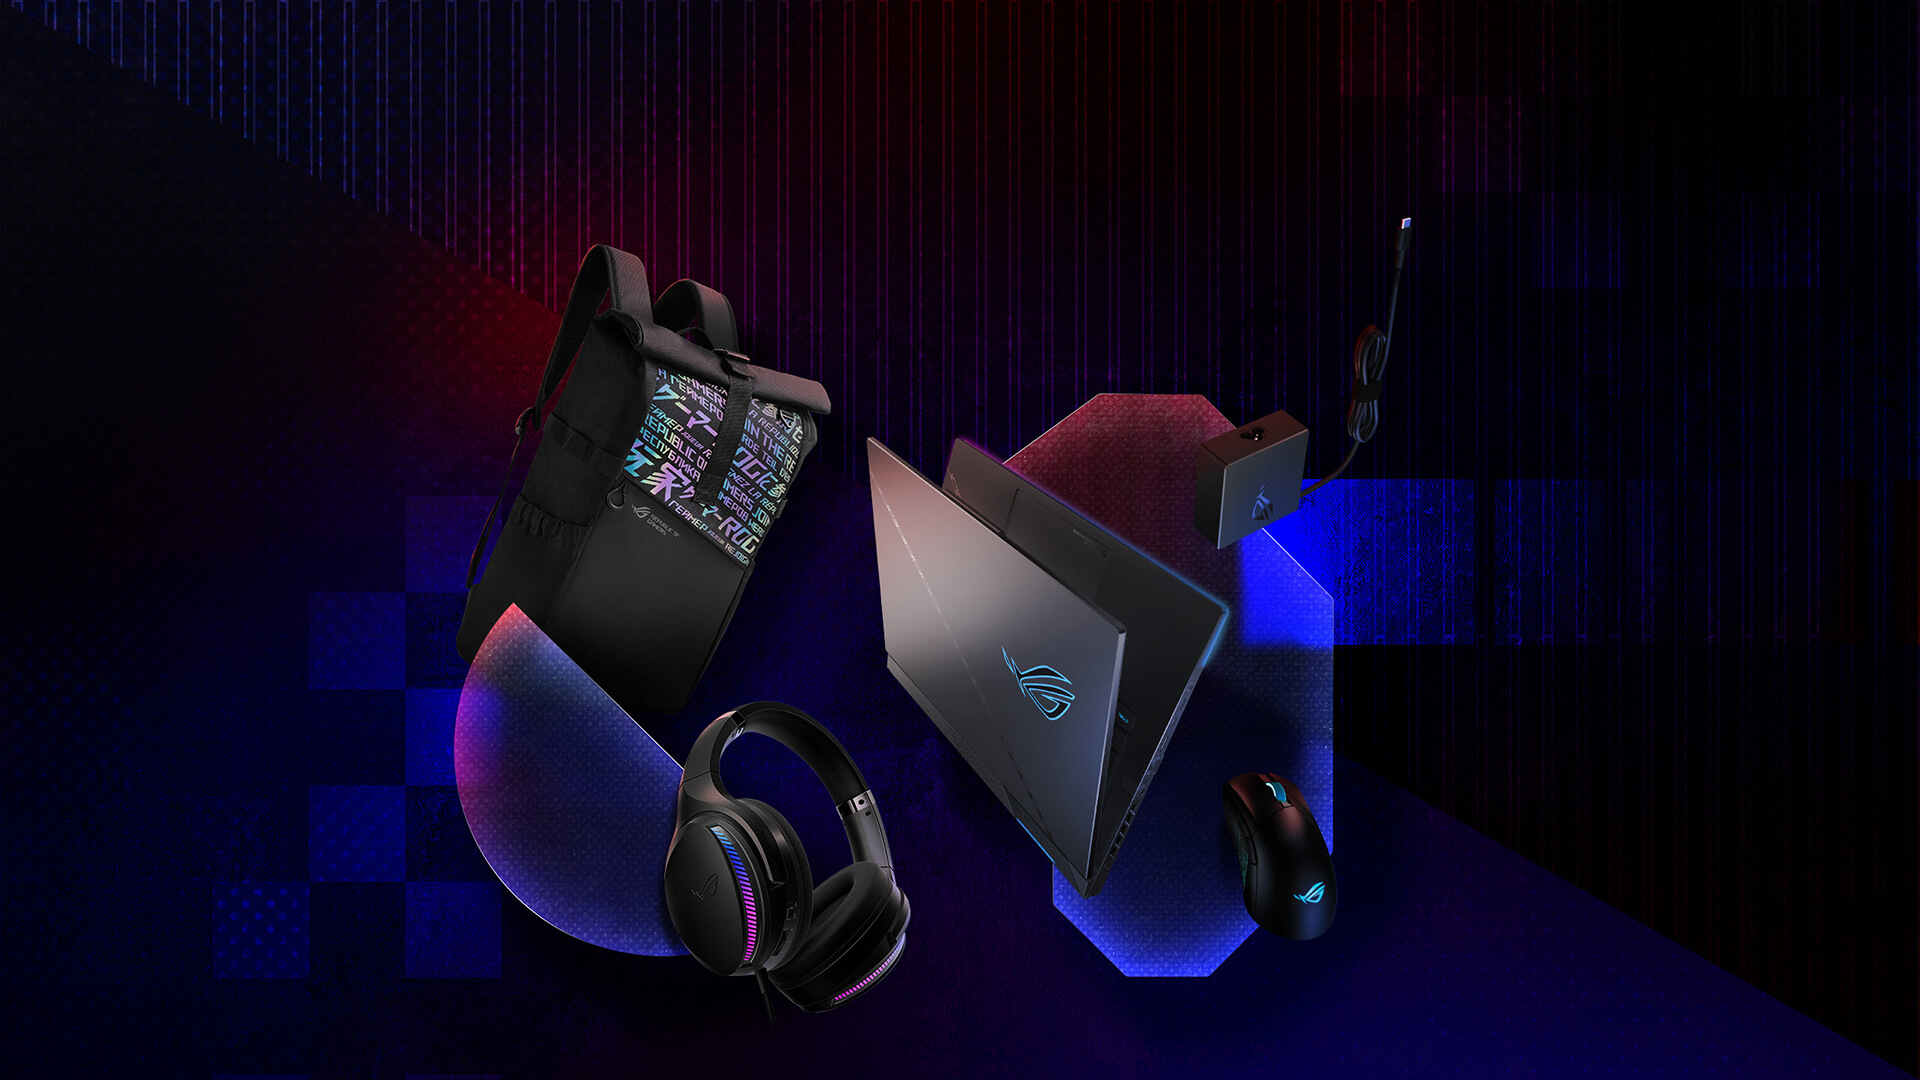 In front of an ROG patterned background, from left to right; an ROG backpack, ROG Fusion II 300 headset, SCAR 16, 100W adapter, and ROG Strix Gladius III mouse.